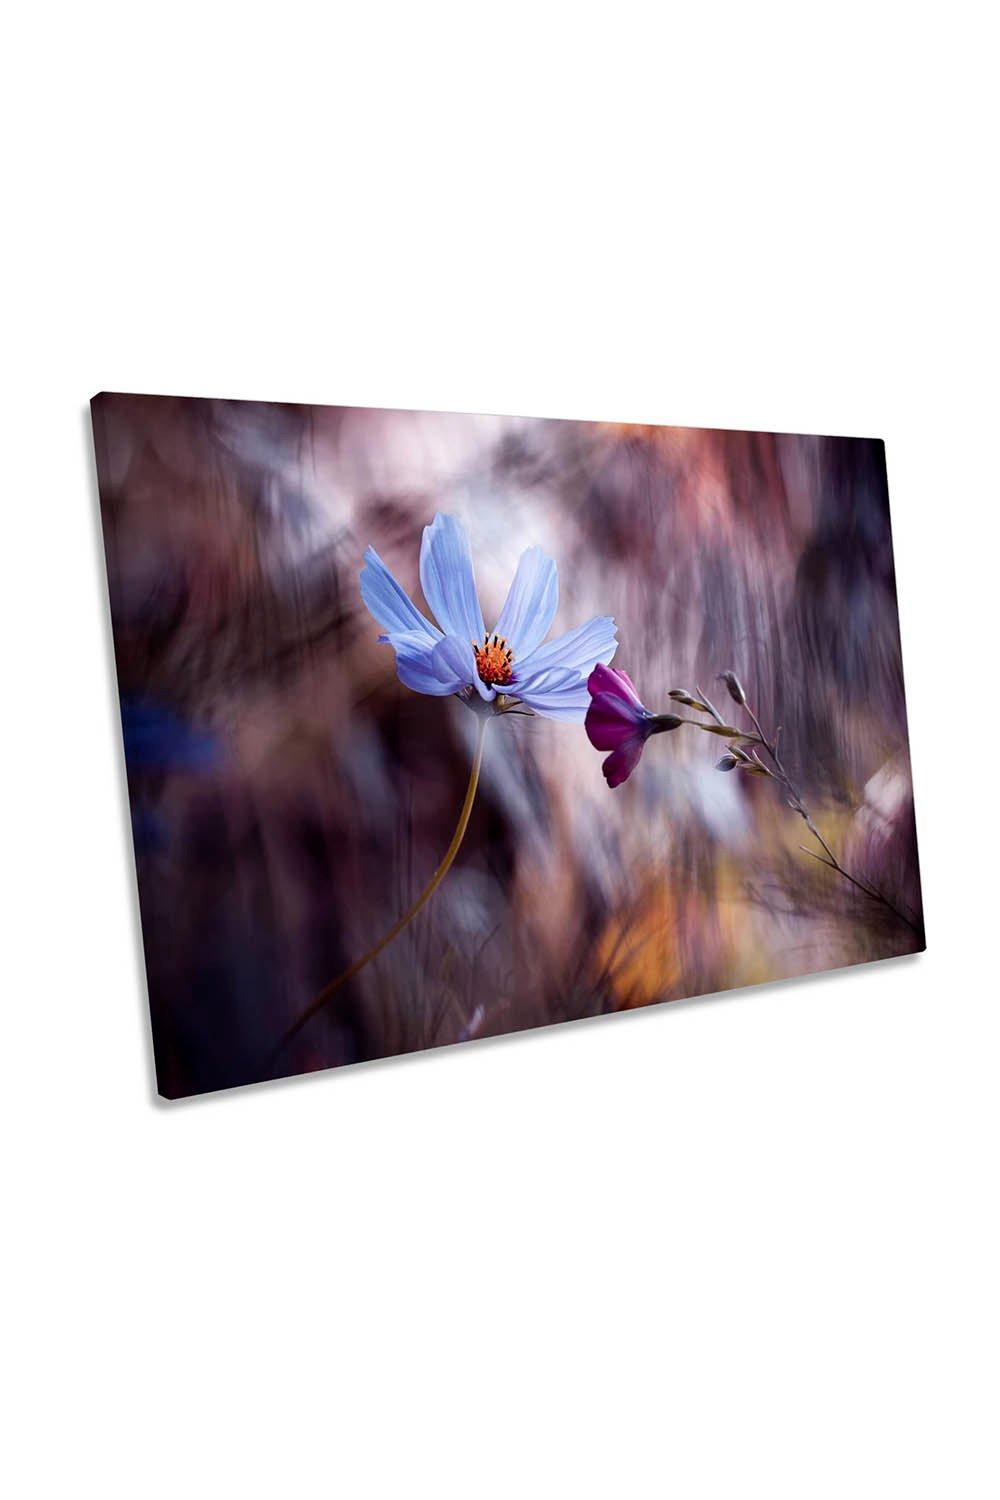 Flower Duo Blue Purple Floral Canvas Wall Art Picture Print